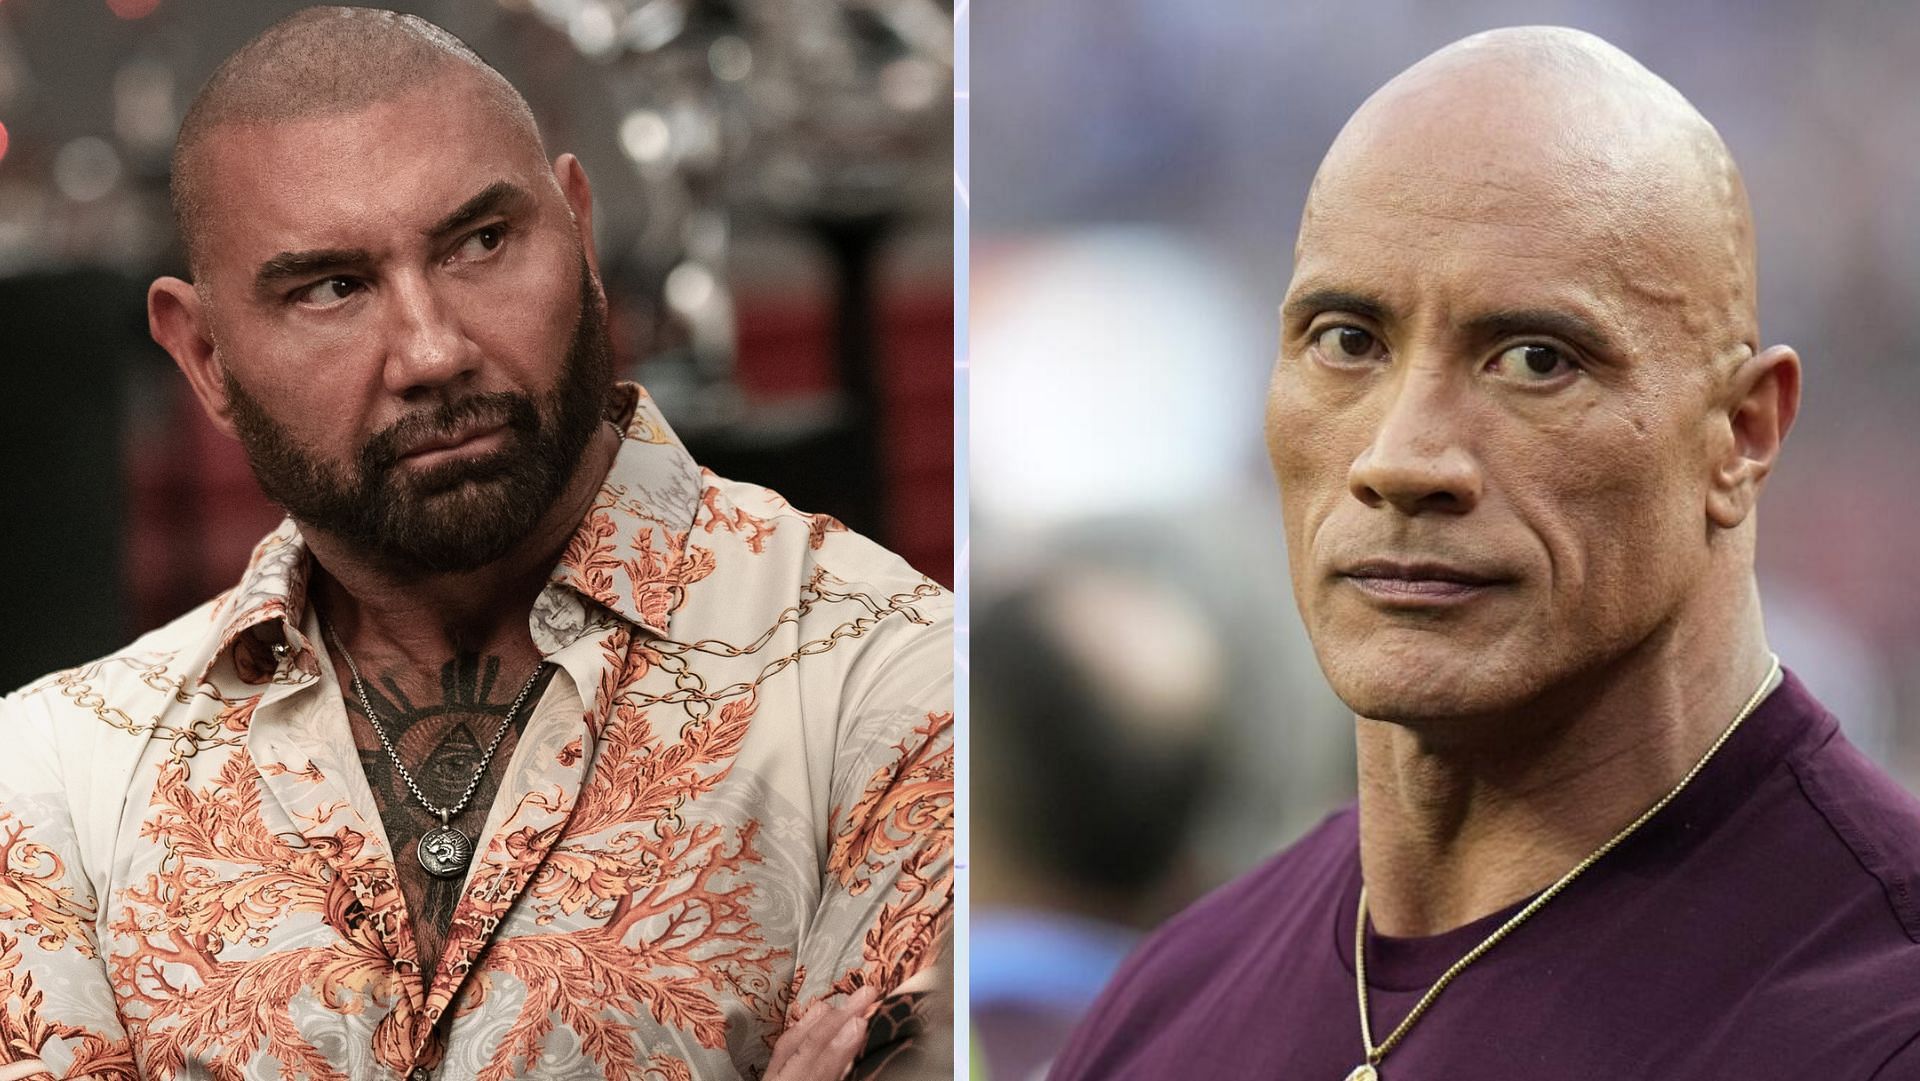 The Rock and Dave Bautista ventured into Hollywood after successful WWE careers.